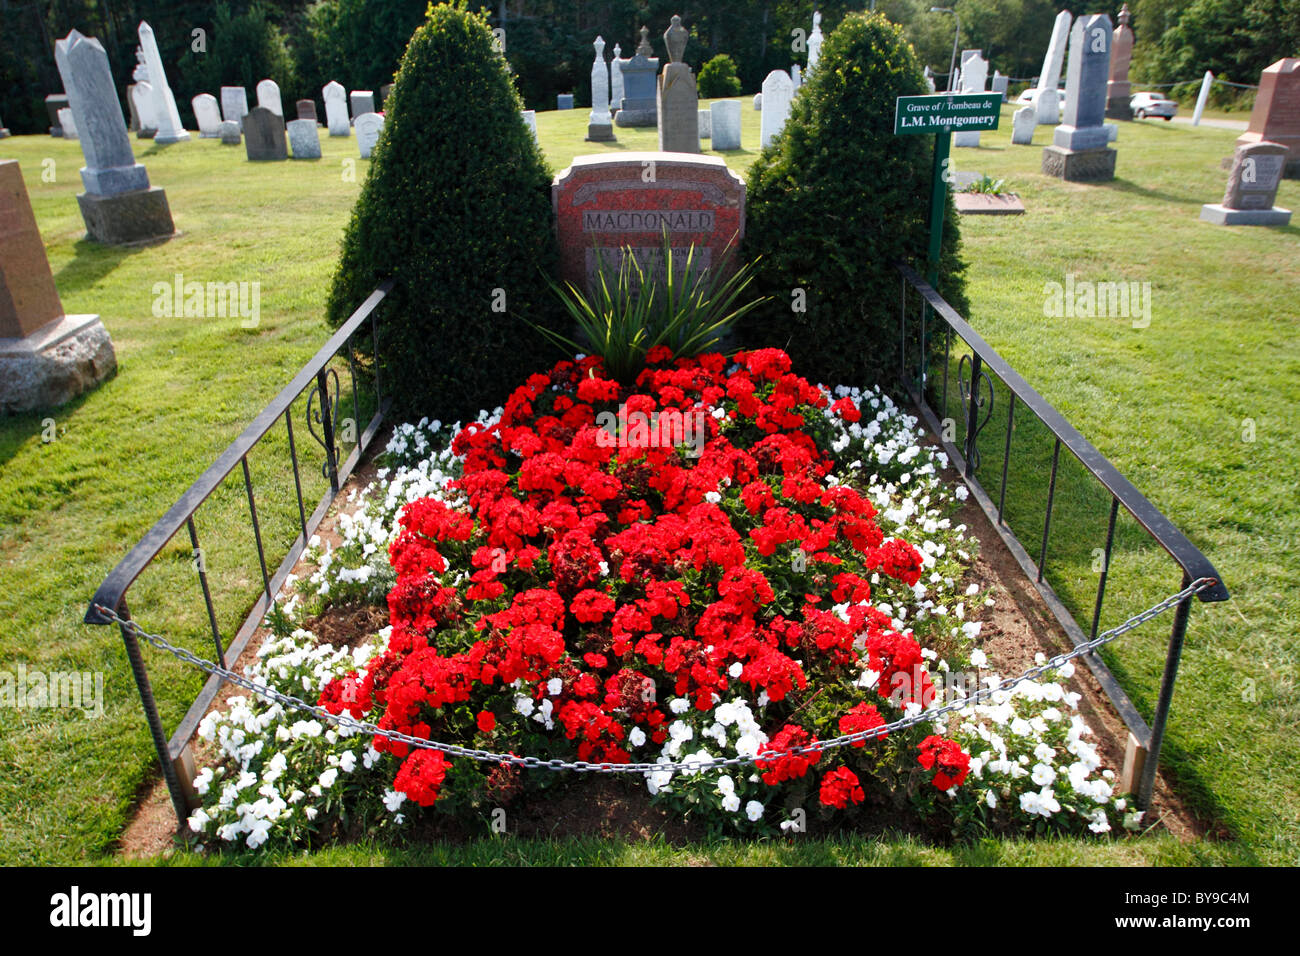 Grave site of Lucy Maud Montgomery of Anne of Green Gables fame Stock Photo